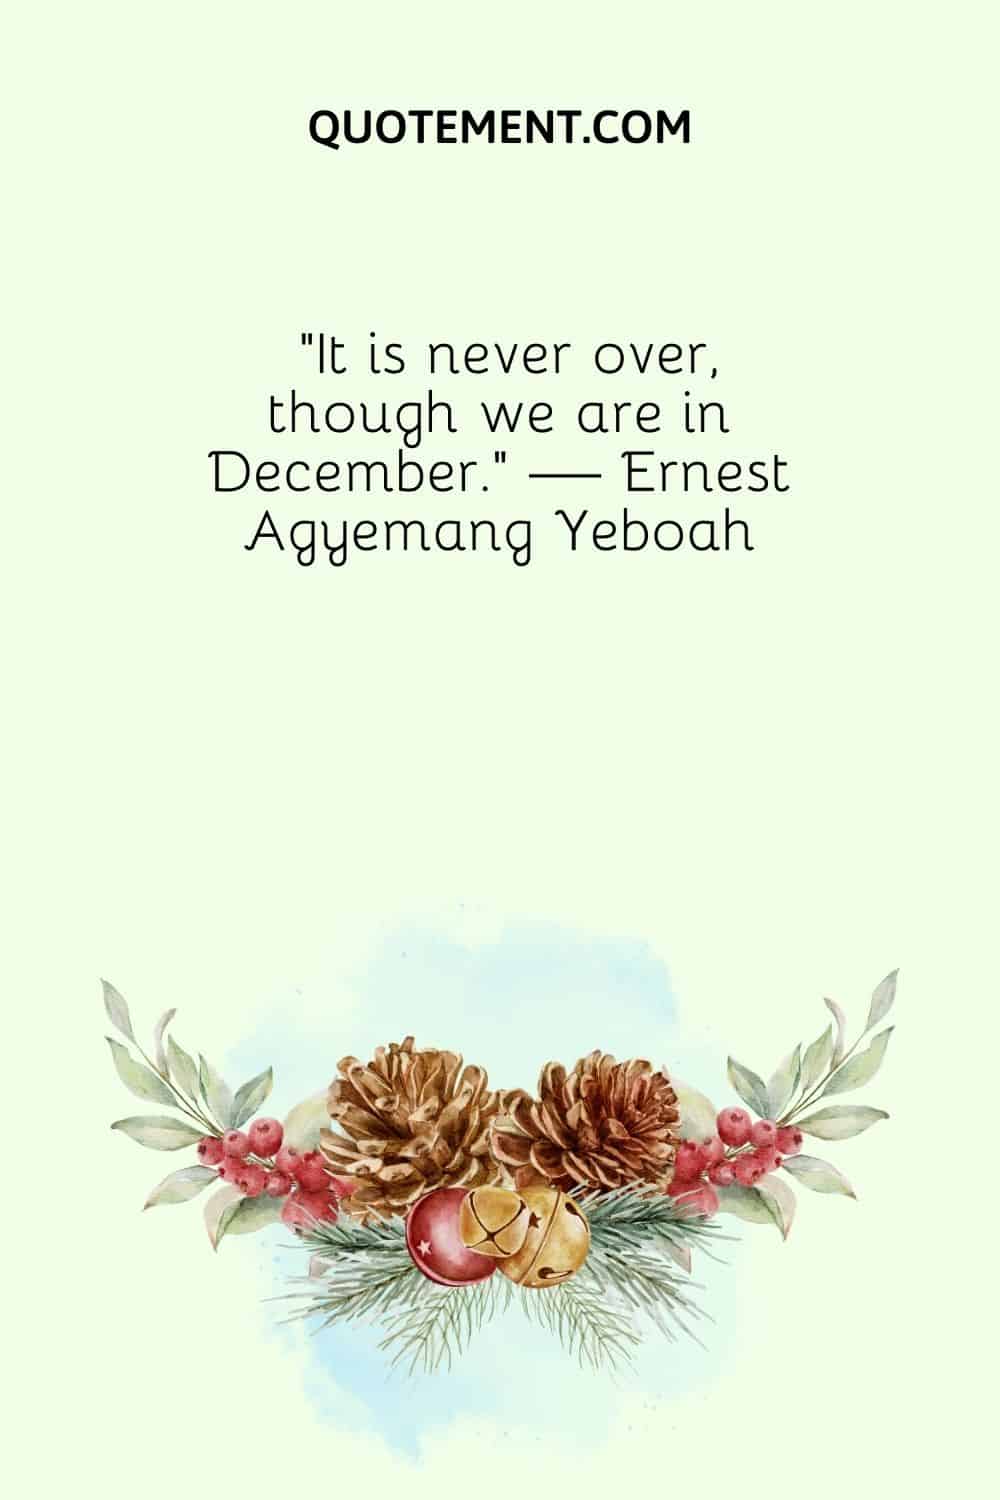 “It is never over, though we are in December.” — Ernest Agyemang Yeboah